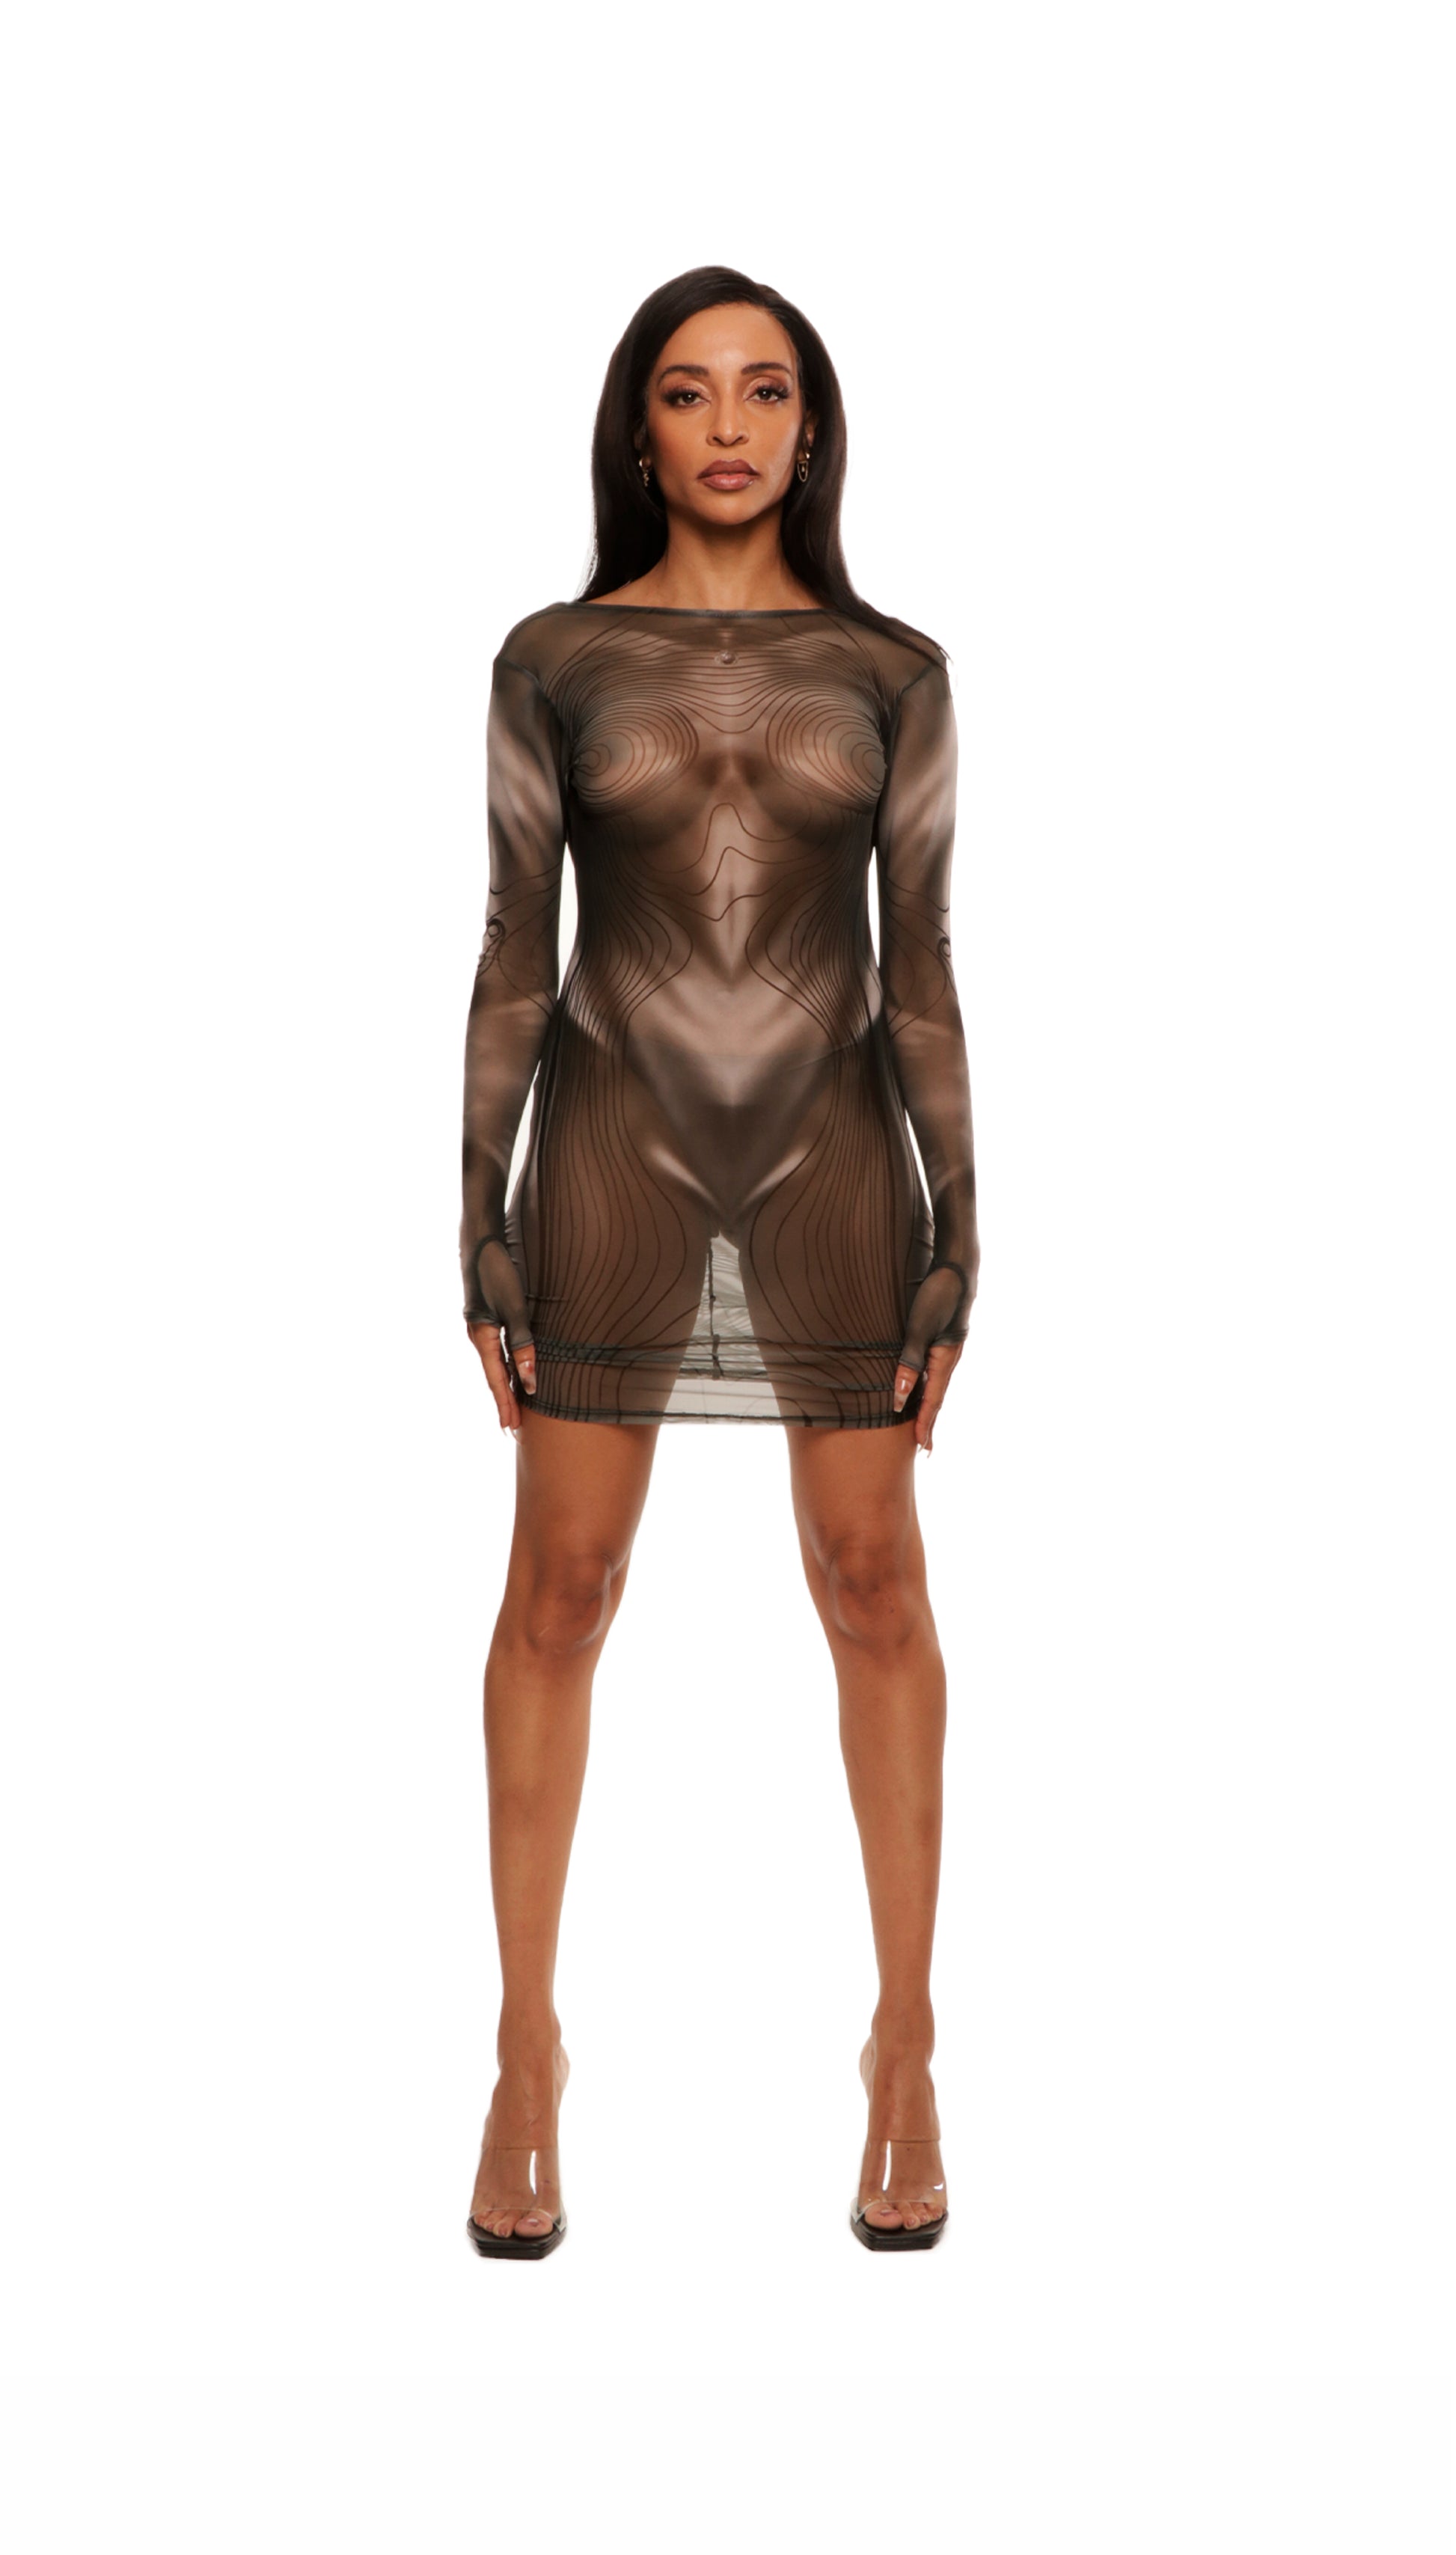 Woman who looks like Beyoncé or Aaliyah wears a grey or gray printed body contouring stretch mesh dress with gauntlet sleeves and open back detail with adjustable clear strap